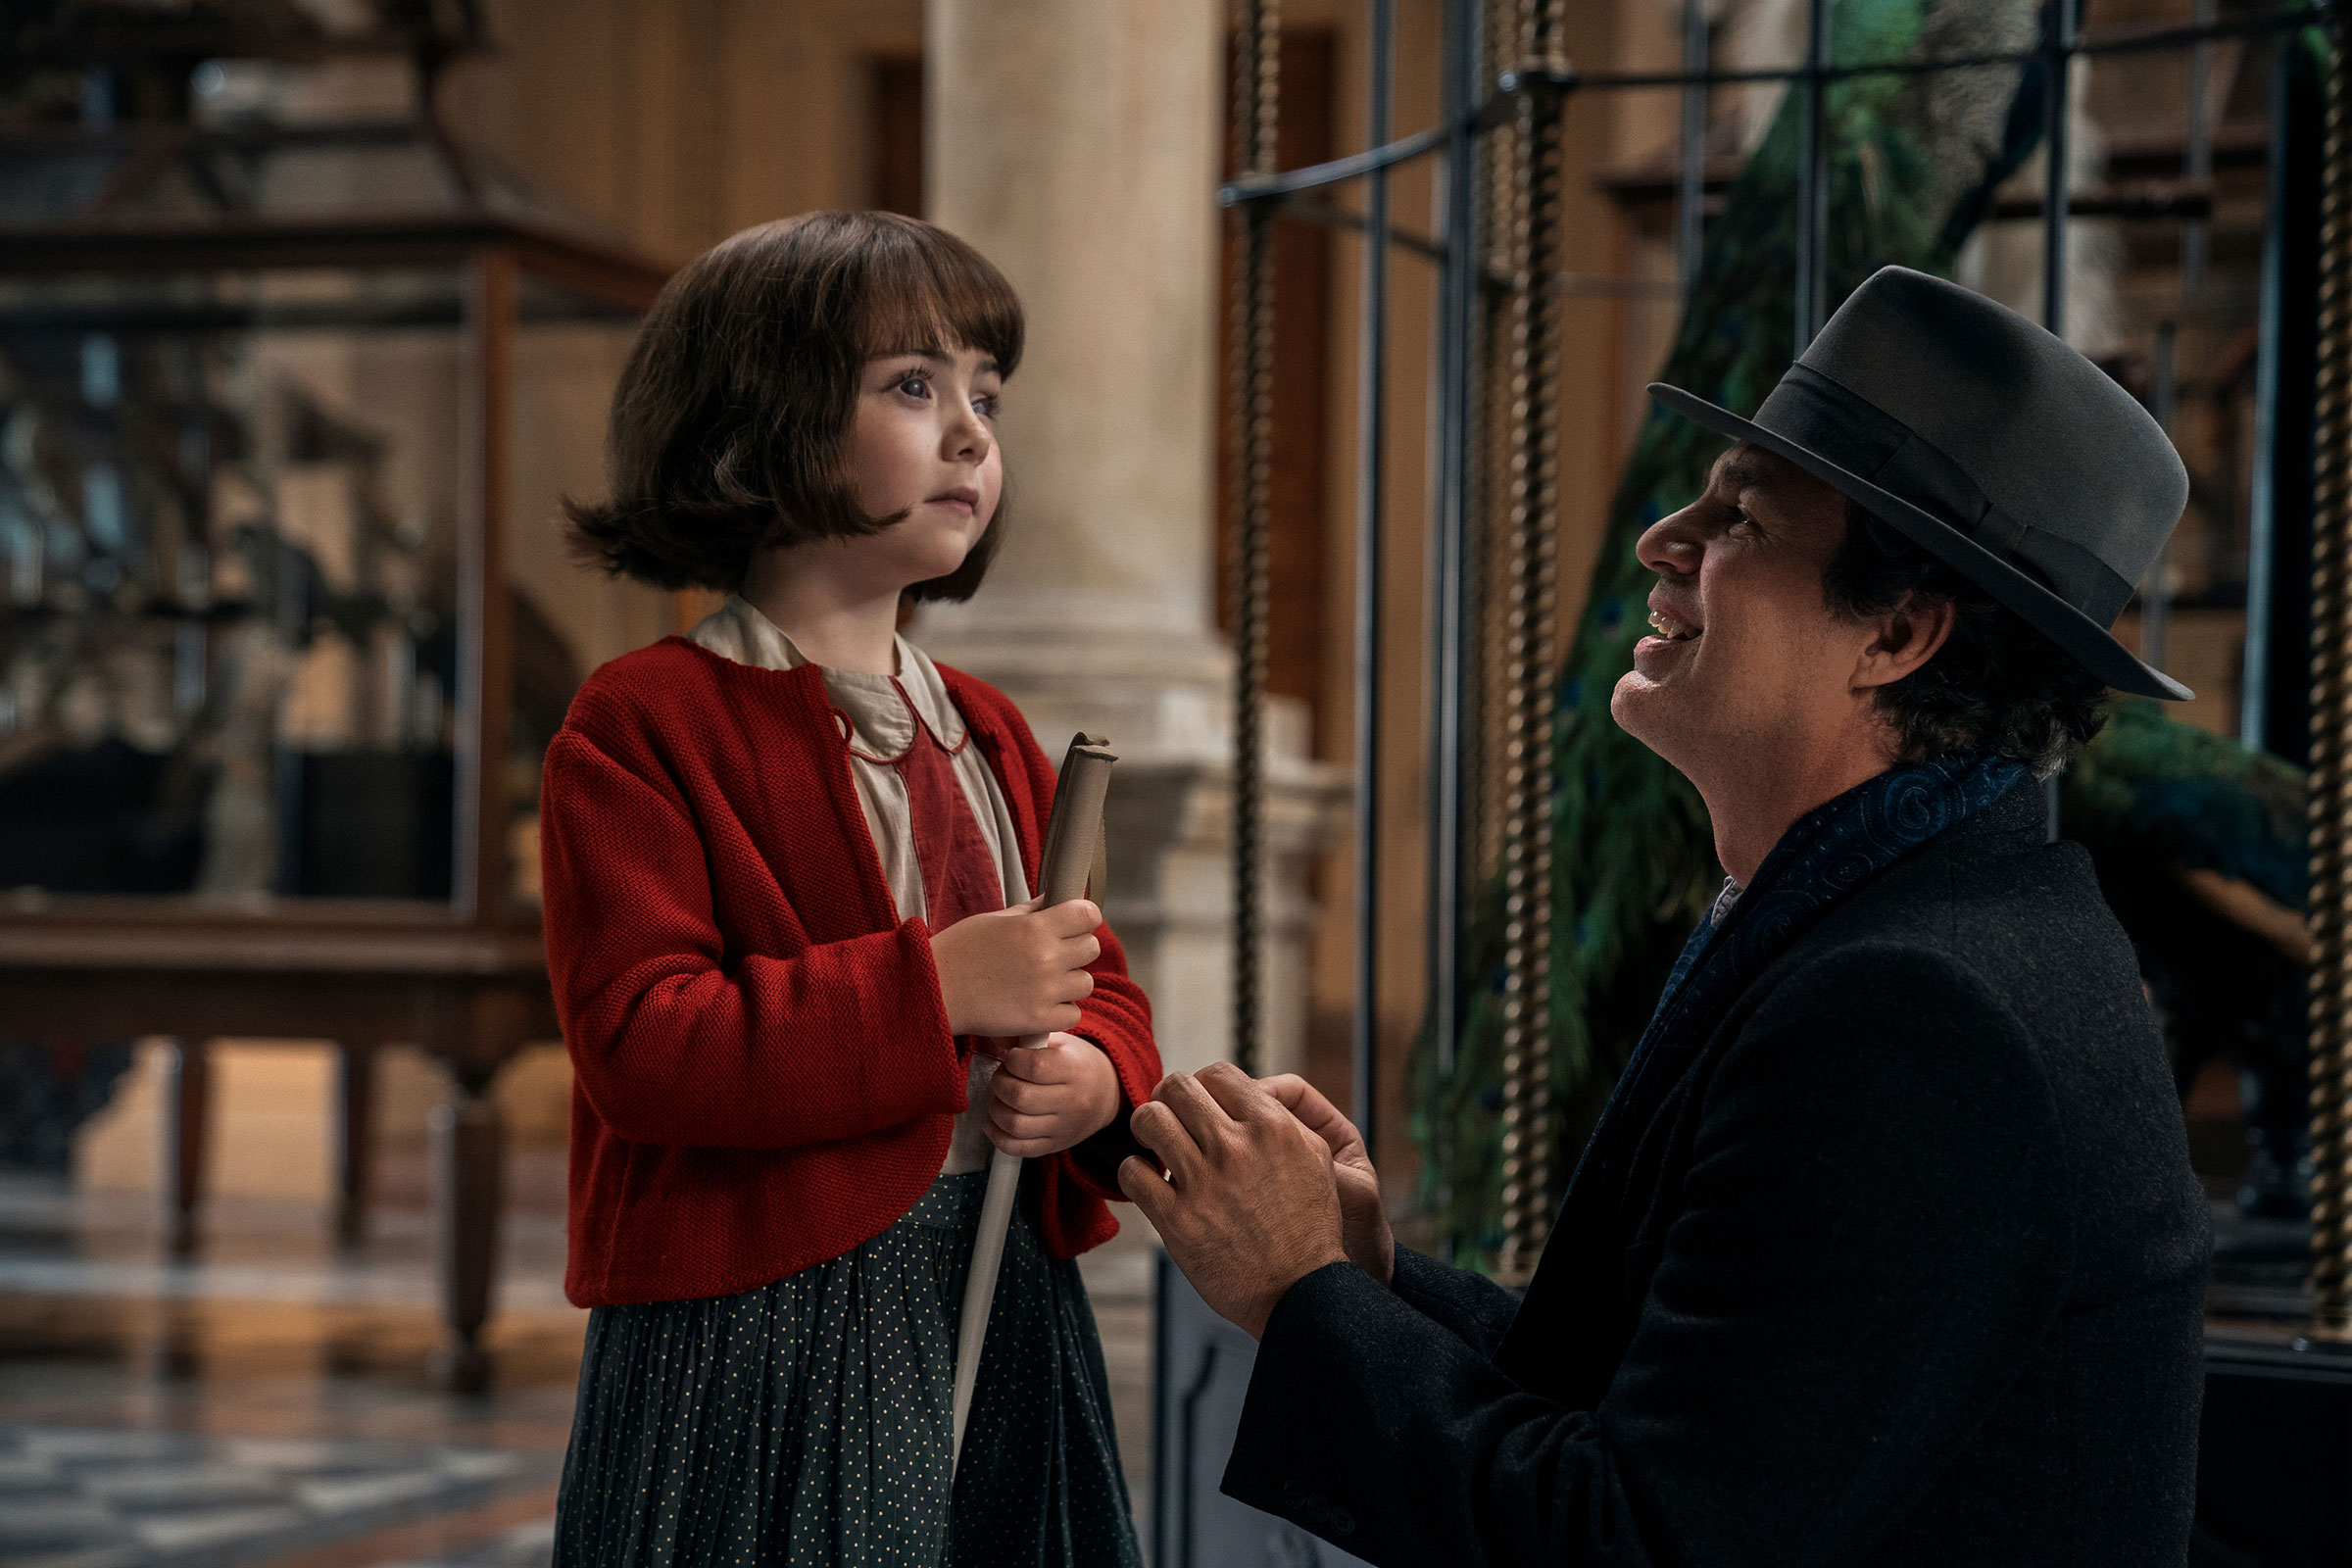 (L-R): Nell Sutton as young Marie-Laure LeBlanc and Mark Ruffalo as Daniel LeBlanc in episode 1 of 'All the Light We Cannot See.'